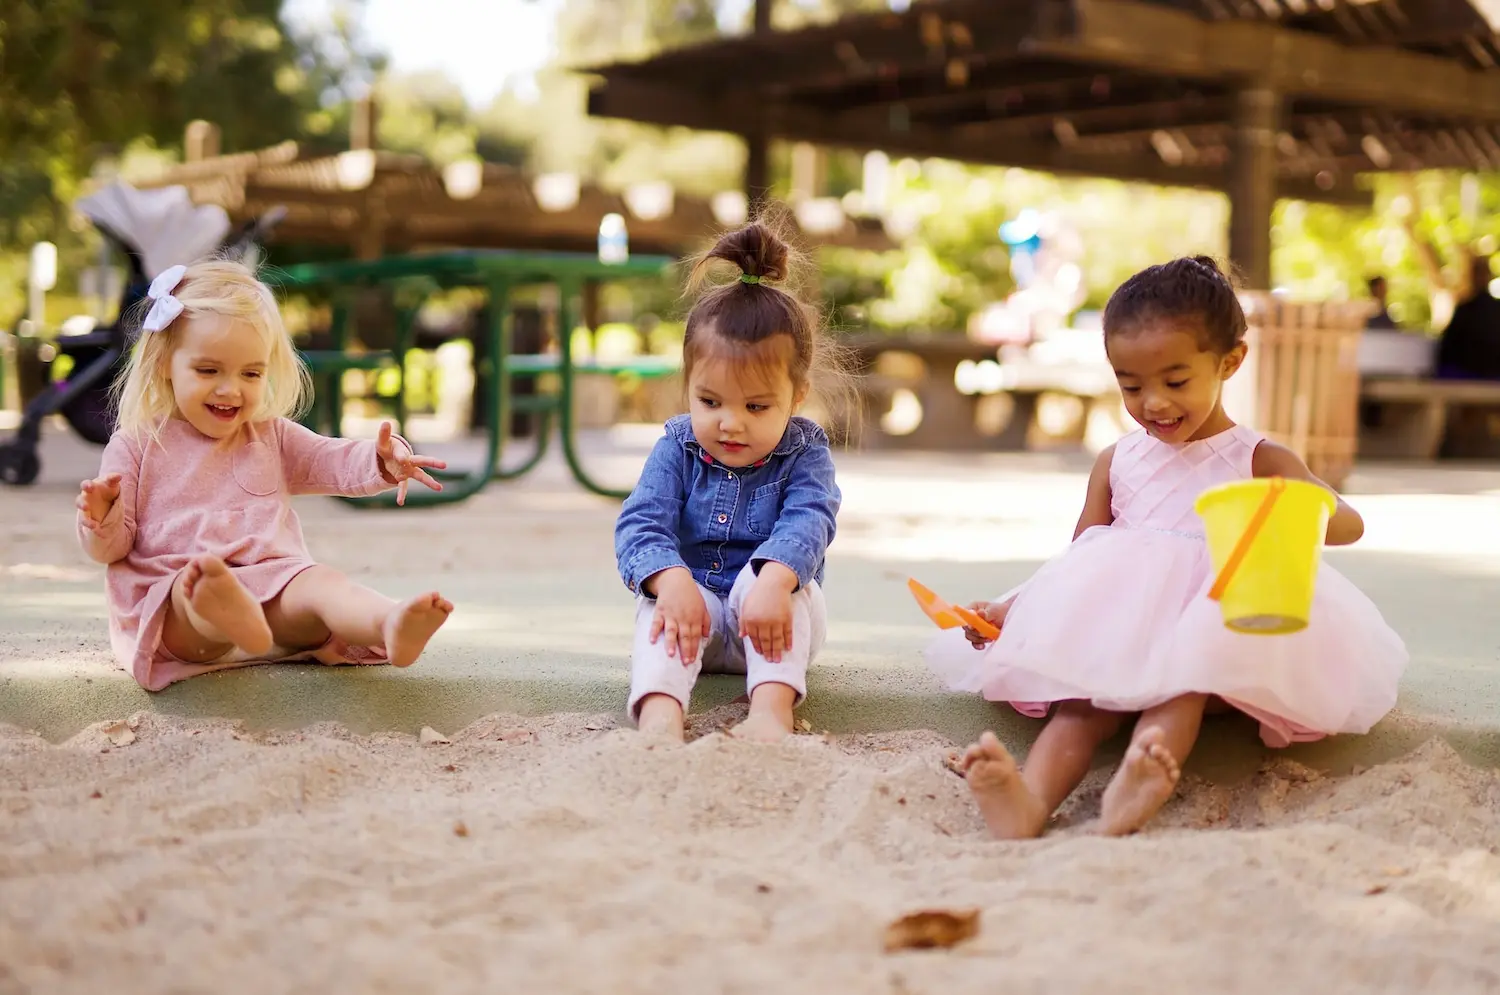 Kids’ Physical Development: Building Strong Foundations